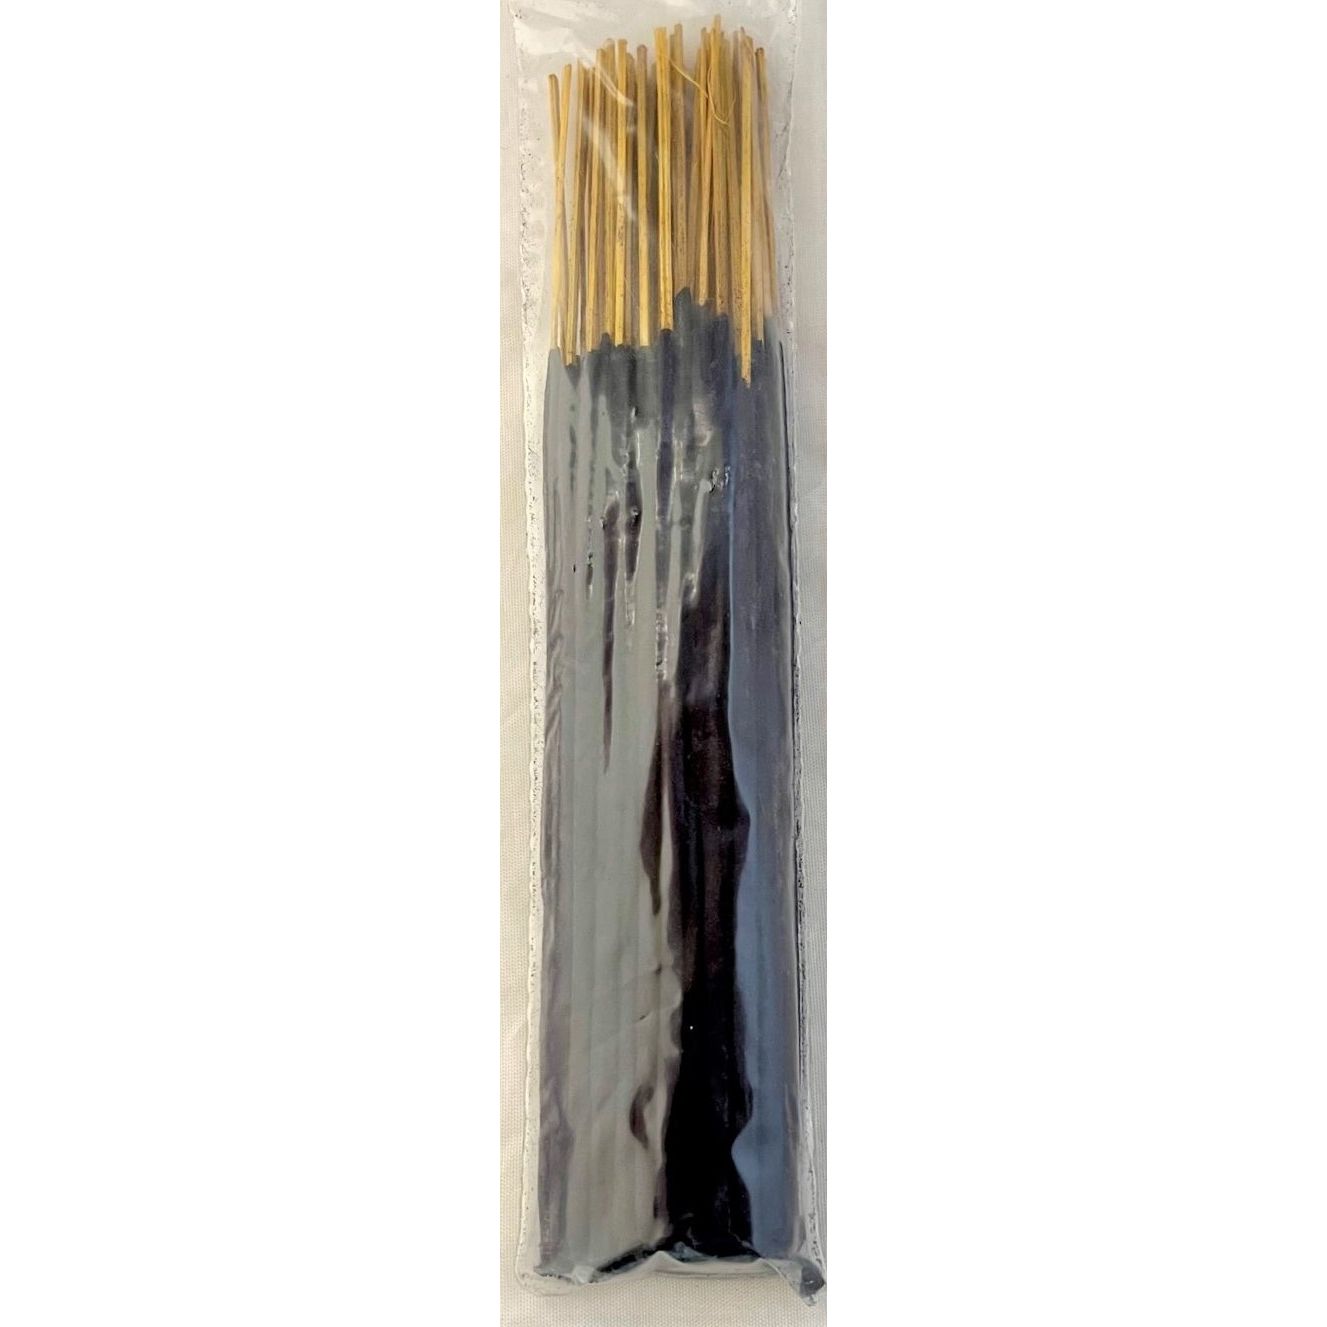 Incense From India - African Spice